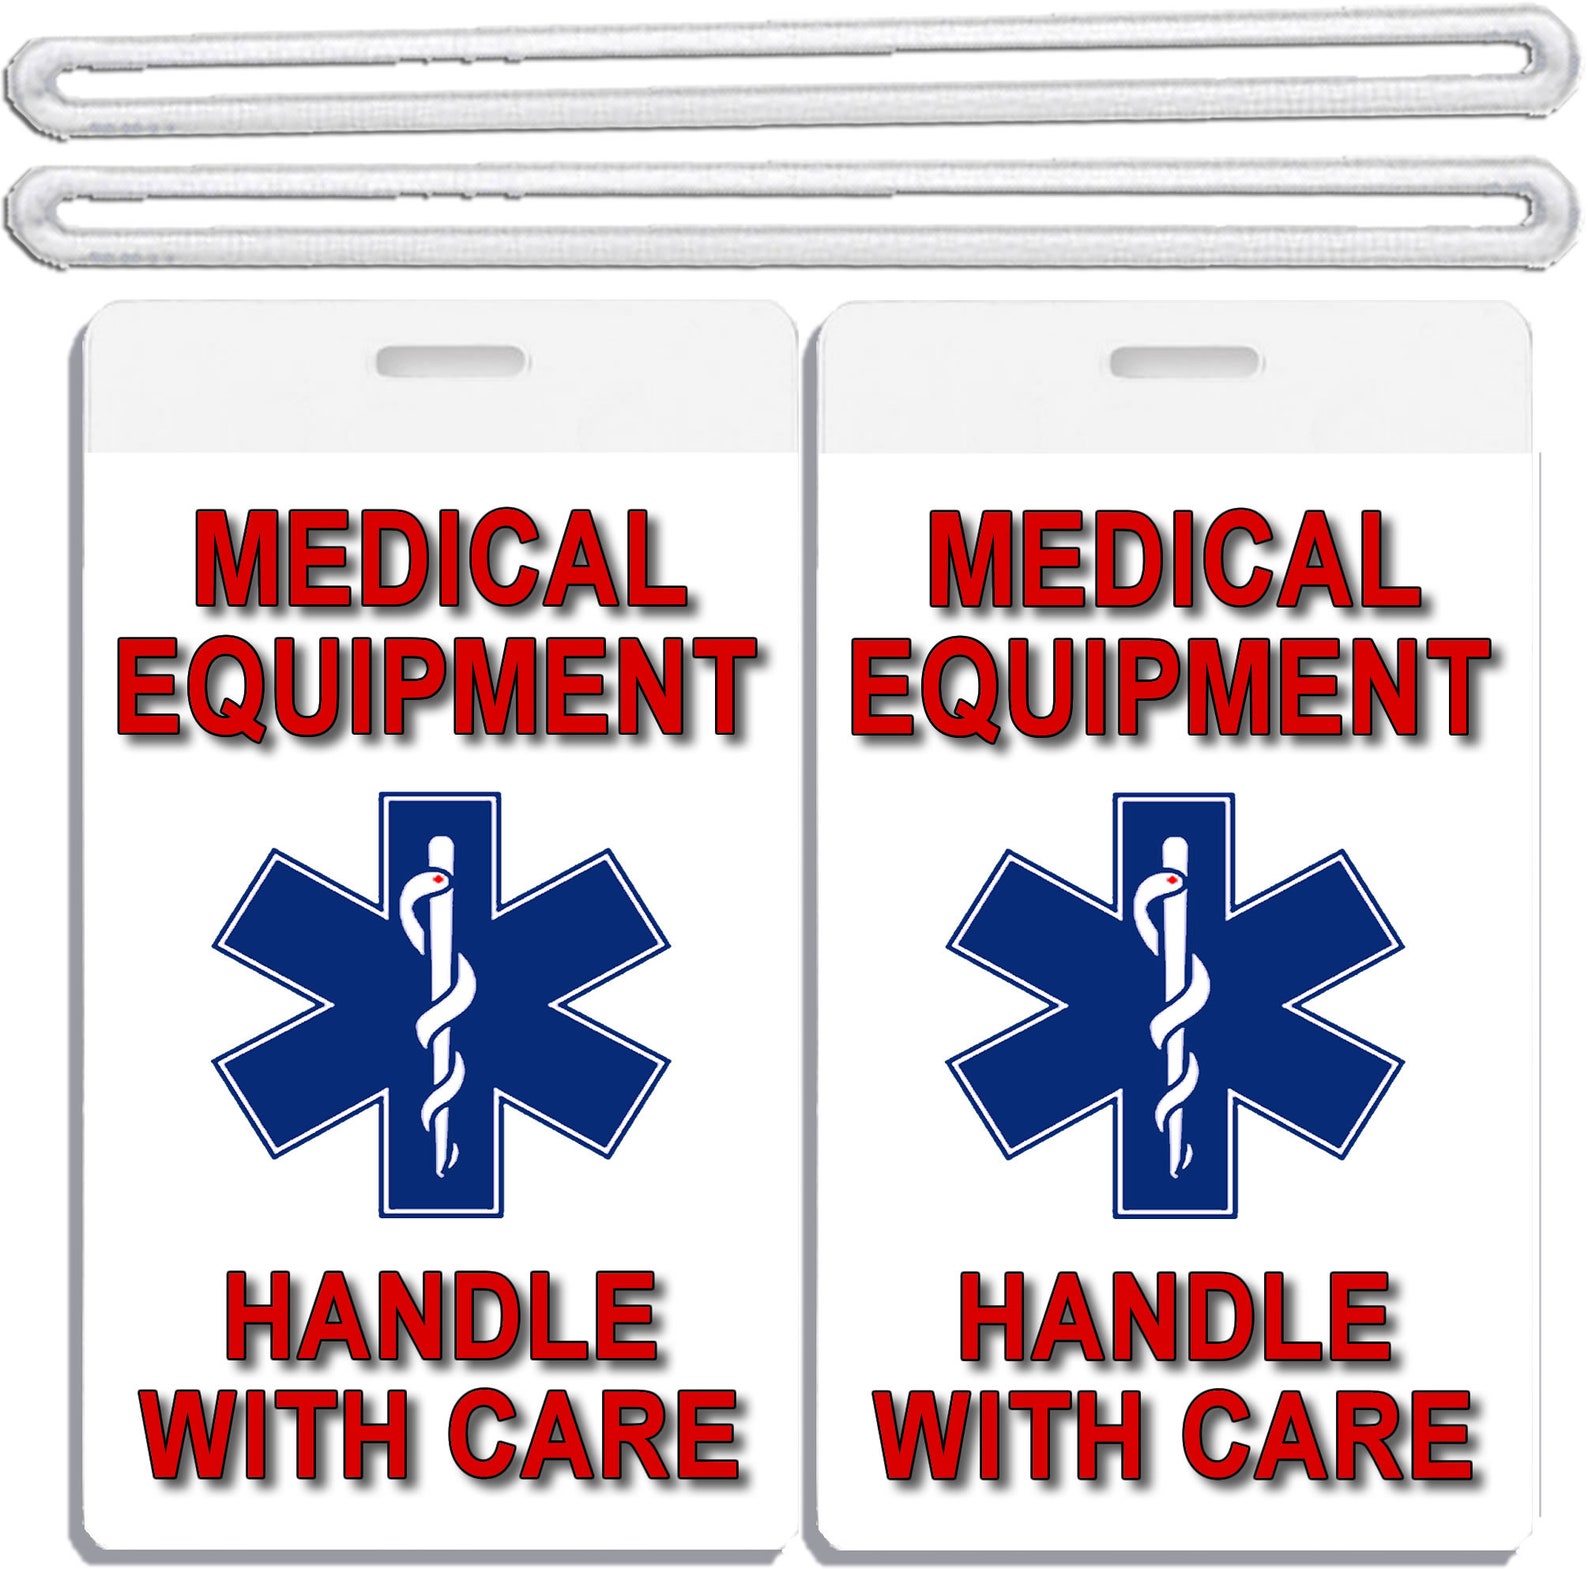 2x-medical-equipment-id-luggage-tags-handle-with-care-tsa-etsy